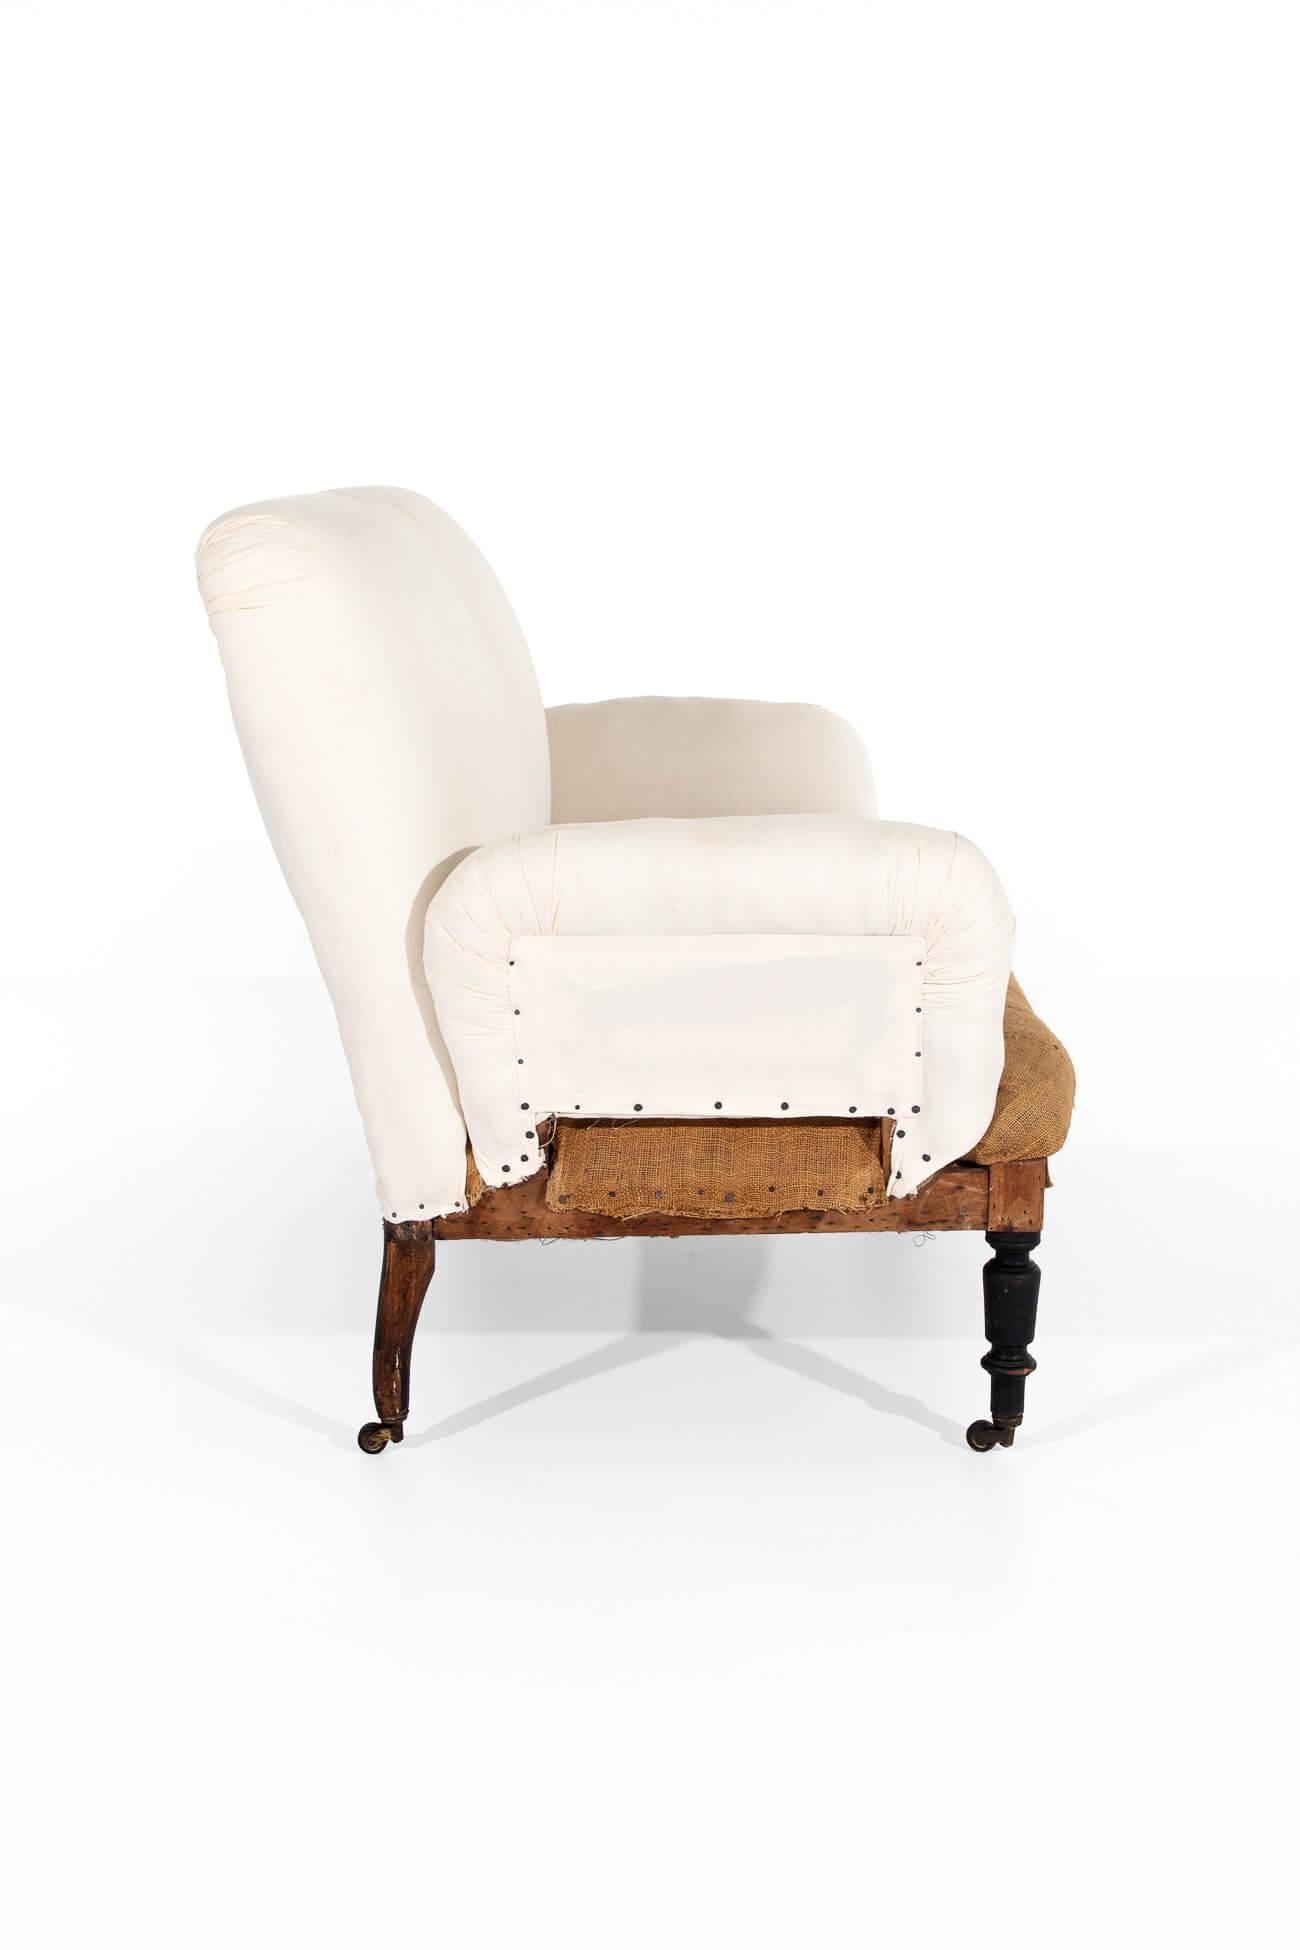 French Provincial Napoleon III Deconstructed Two Seater Sofa For Sale